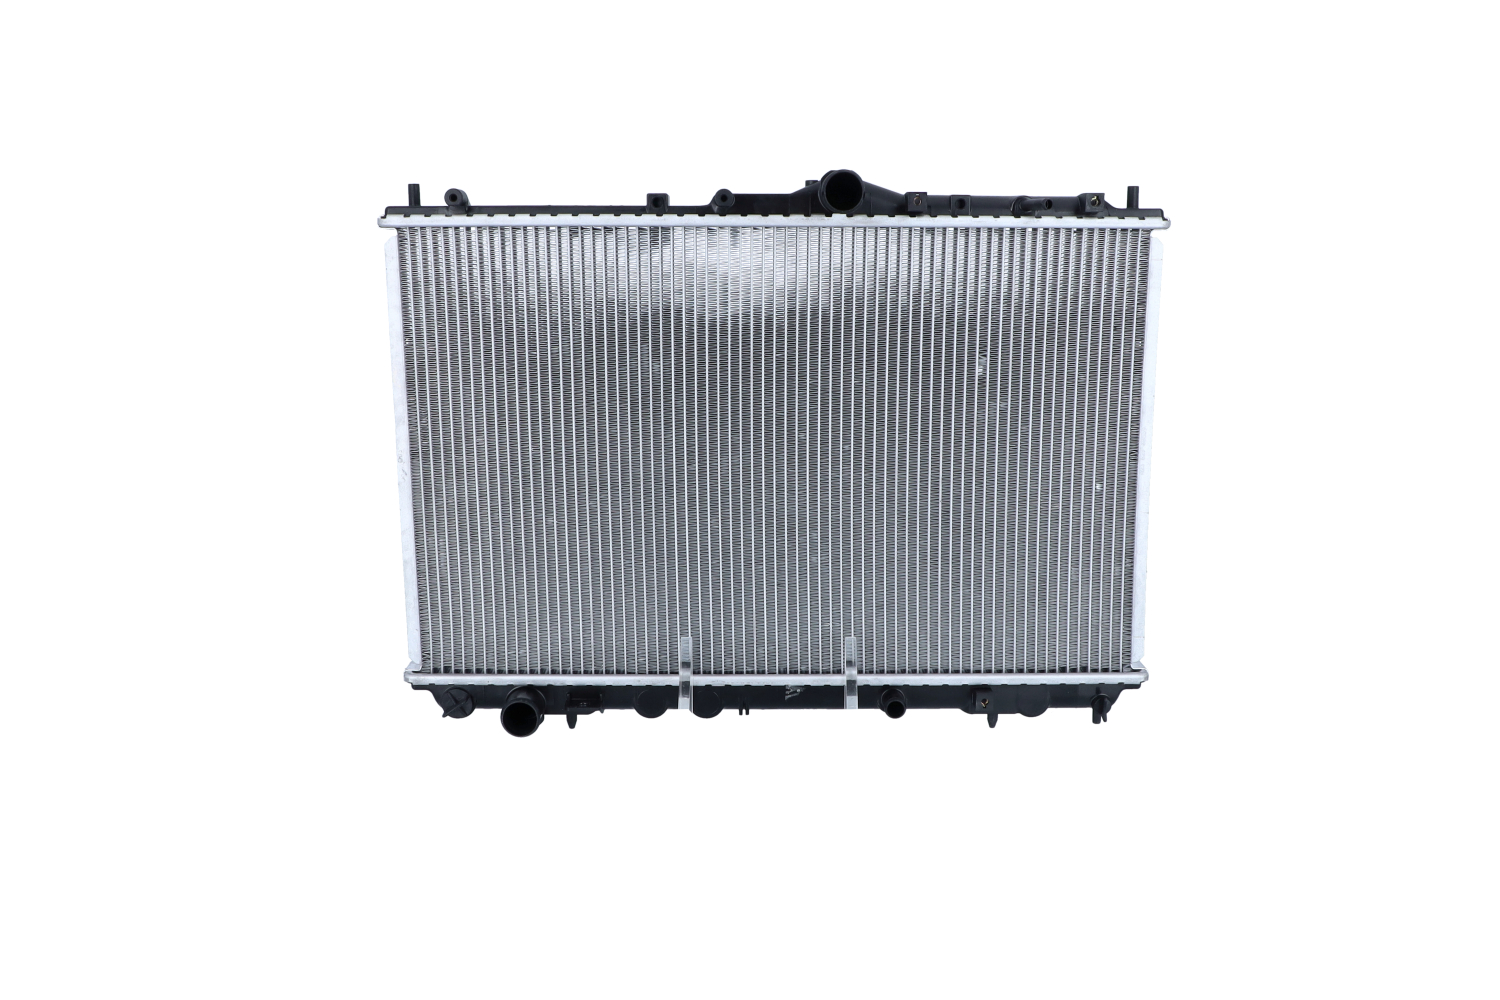 NRF 509518 Engine radiator Aluminium, 674 x 400 x 30 mm, with mounting parts, Brazed cooling fins